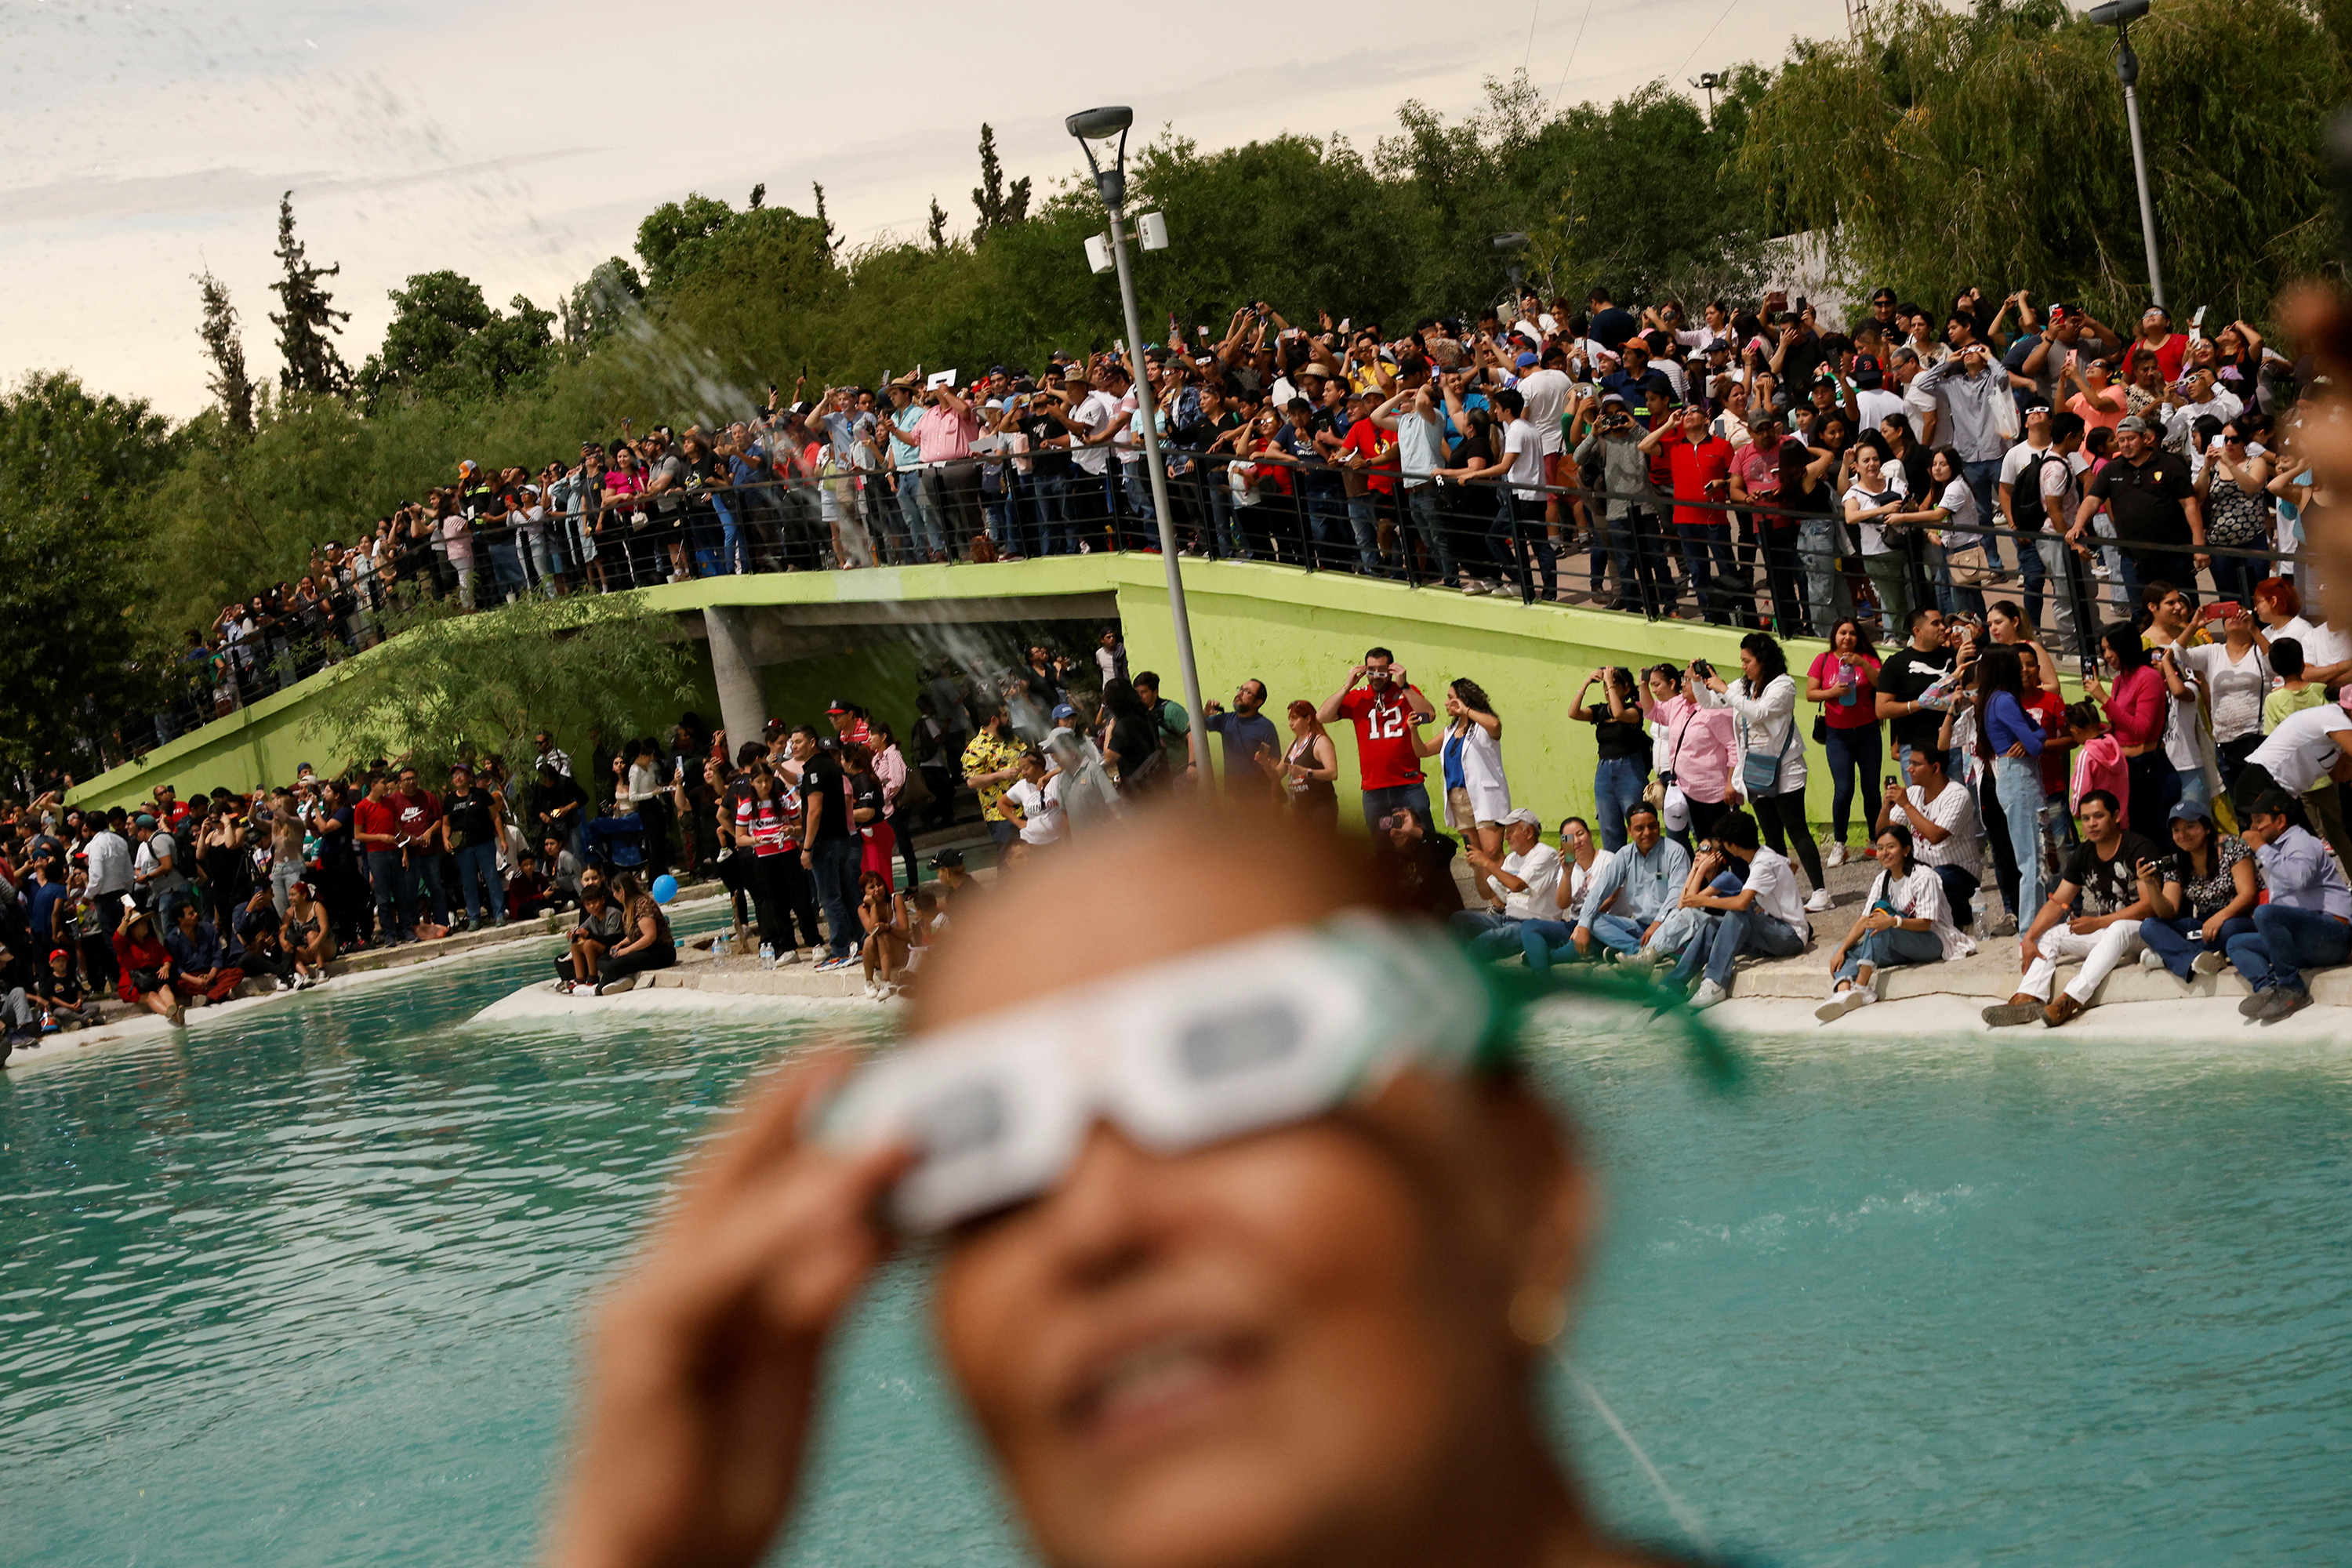 People observe the eclipse in Torreón, Mexico.